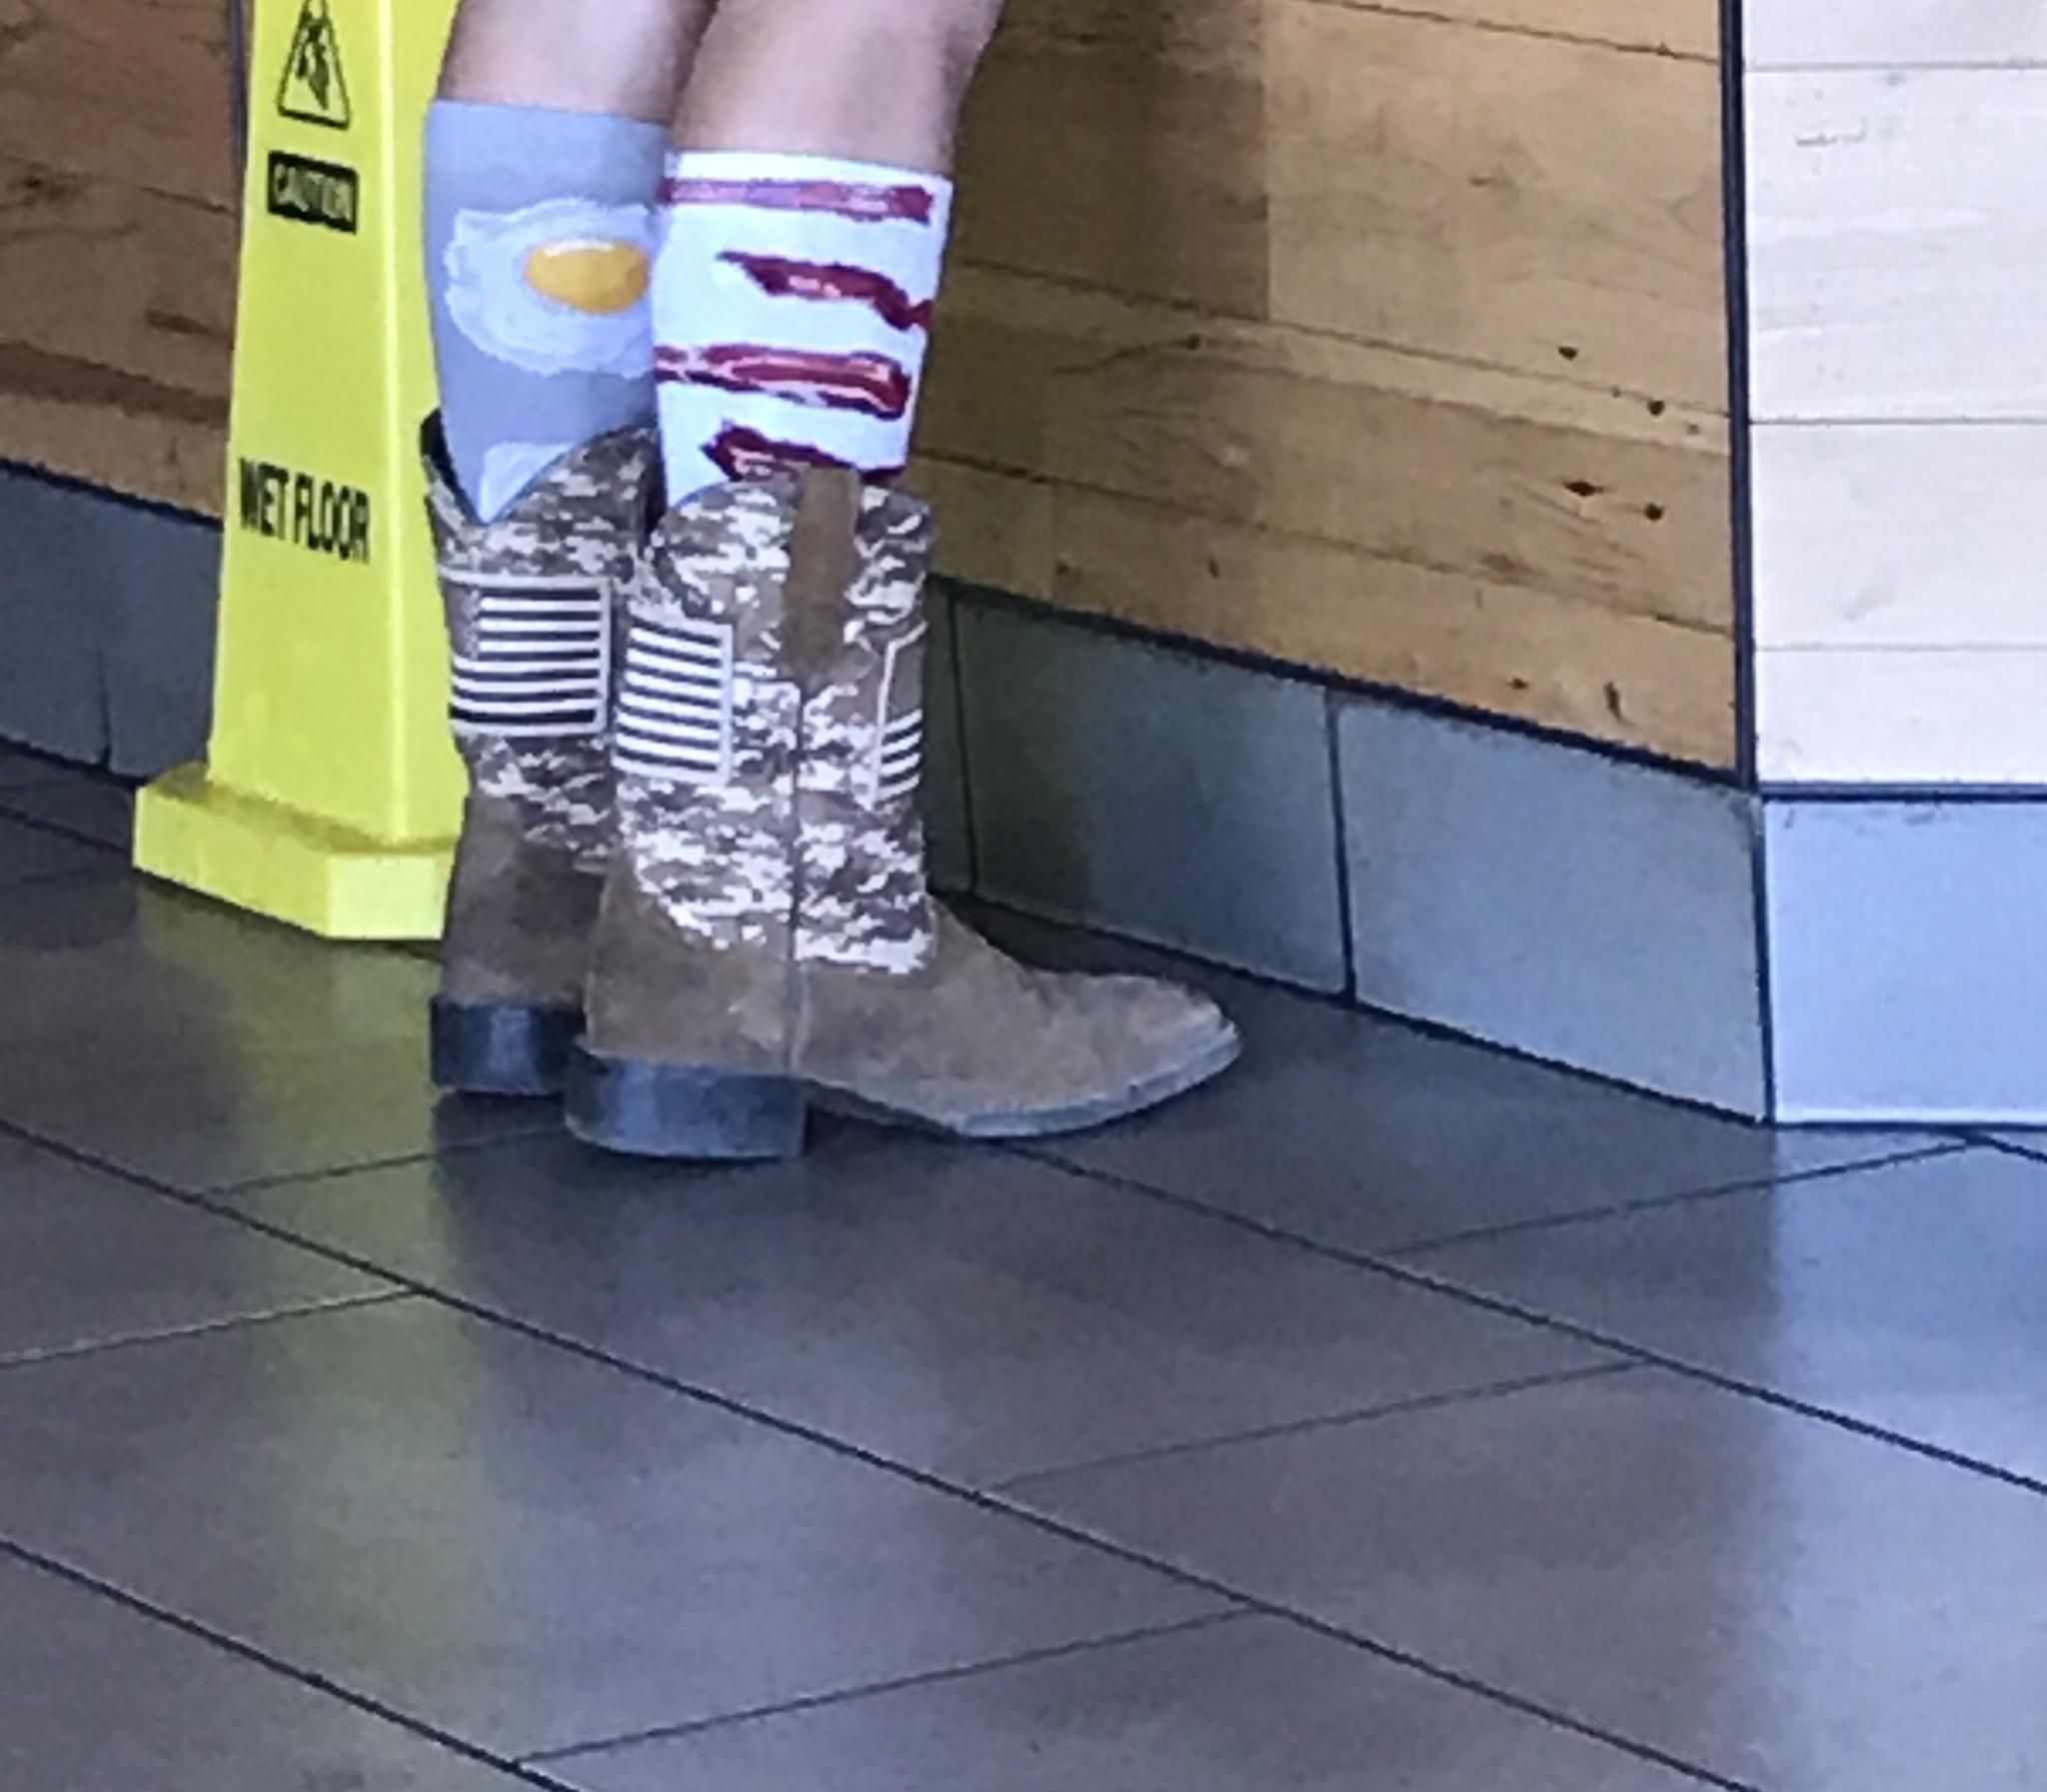 This kids footwear combo I saw this afternoon